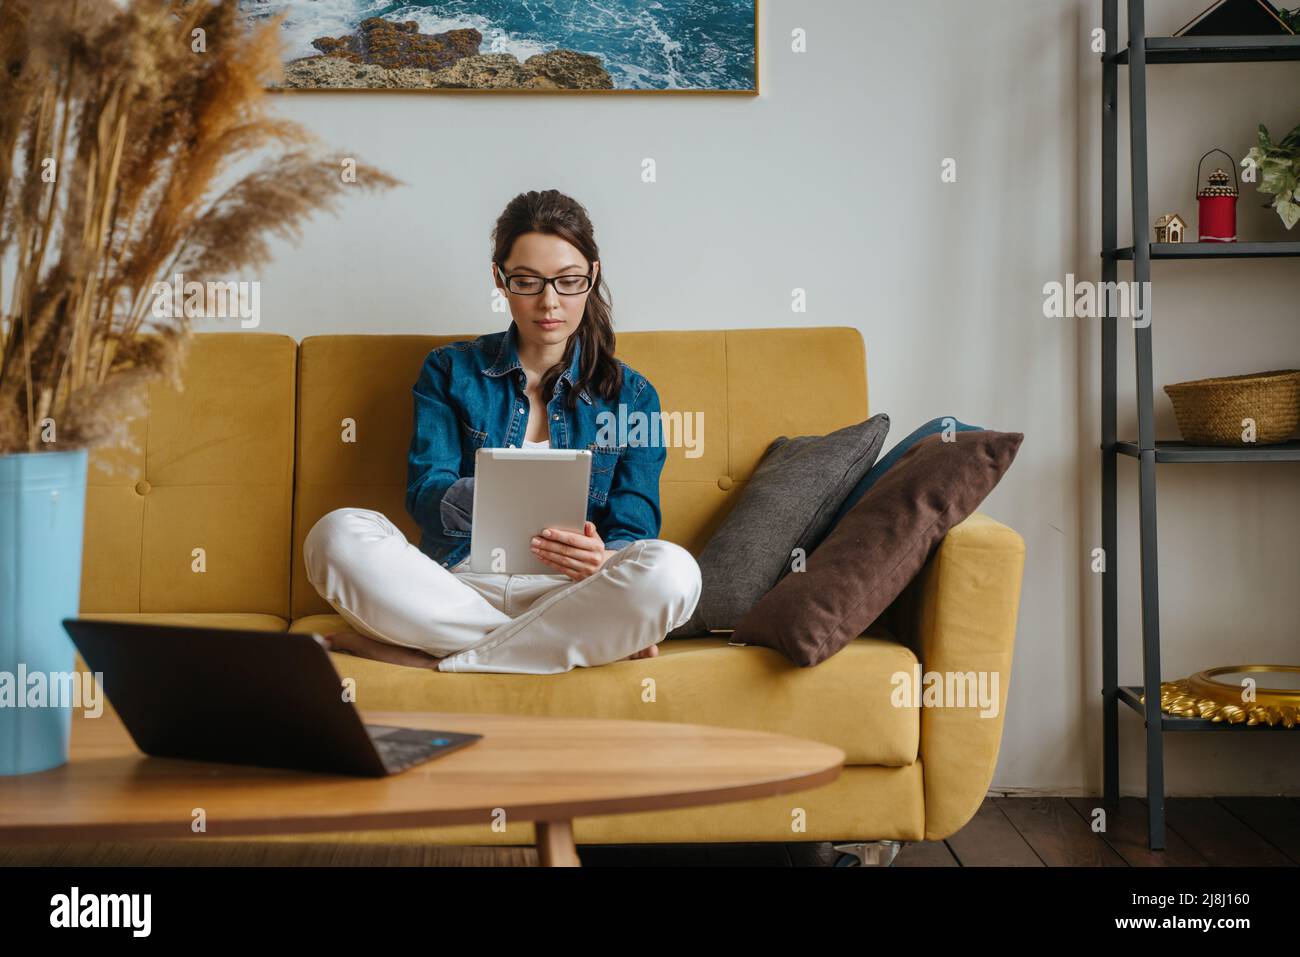 Happy woman reading a book in an ebook reader sitting on a couch at home Stock Photo